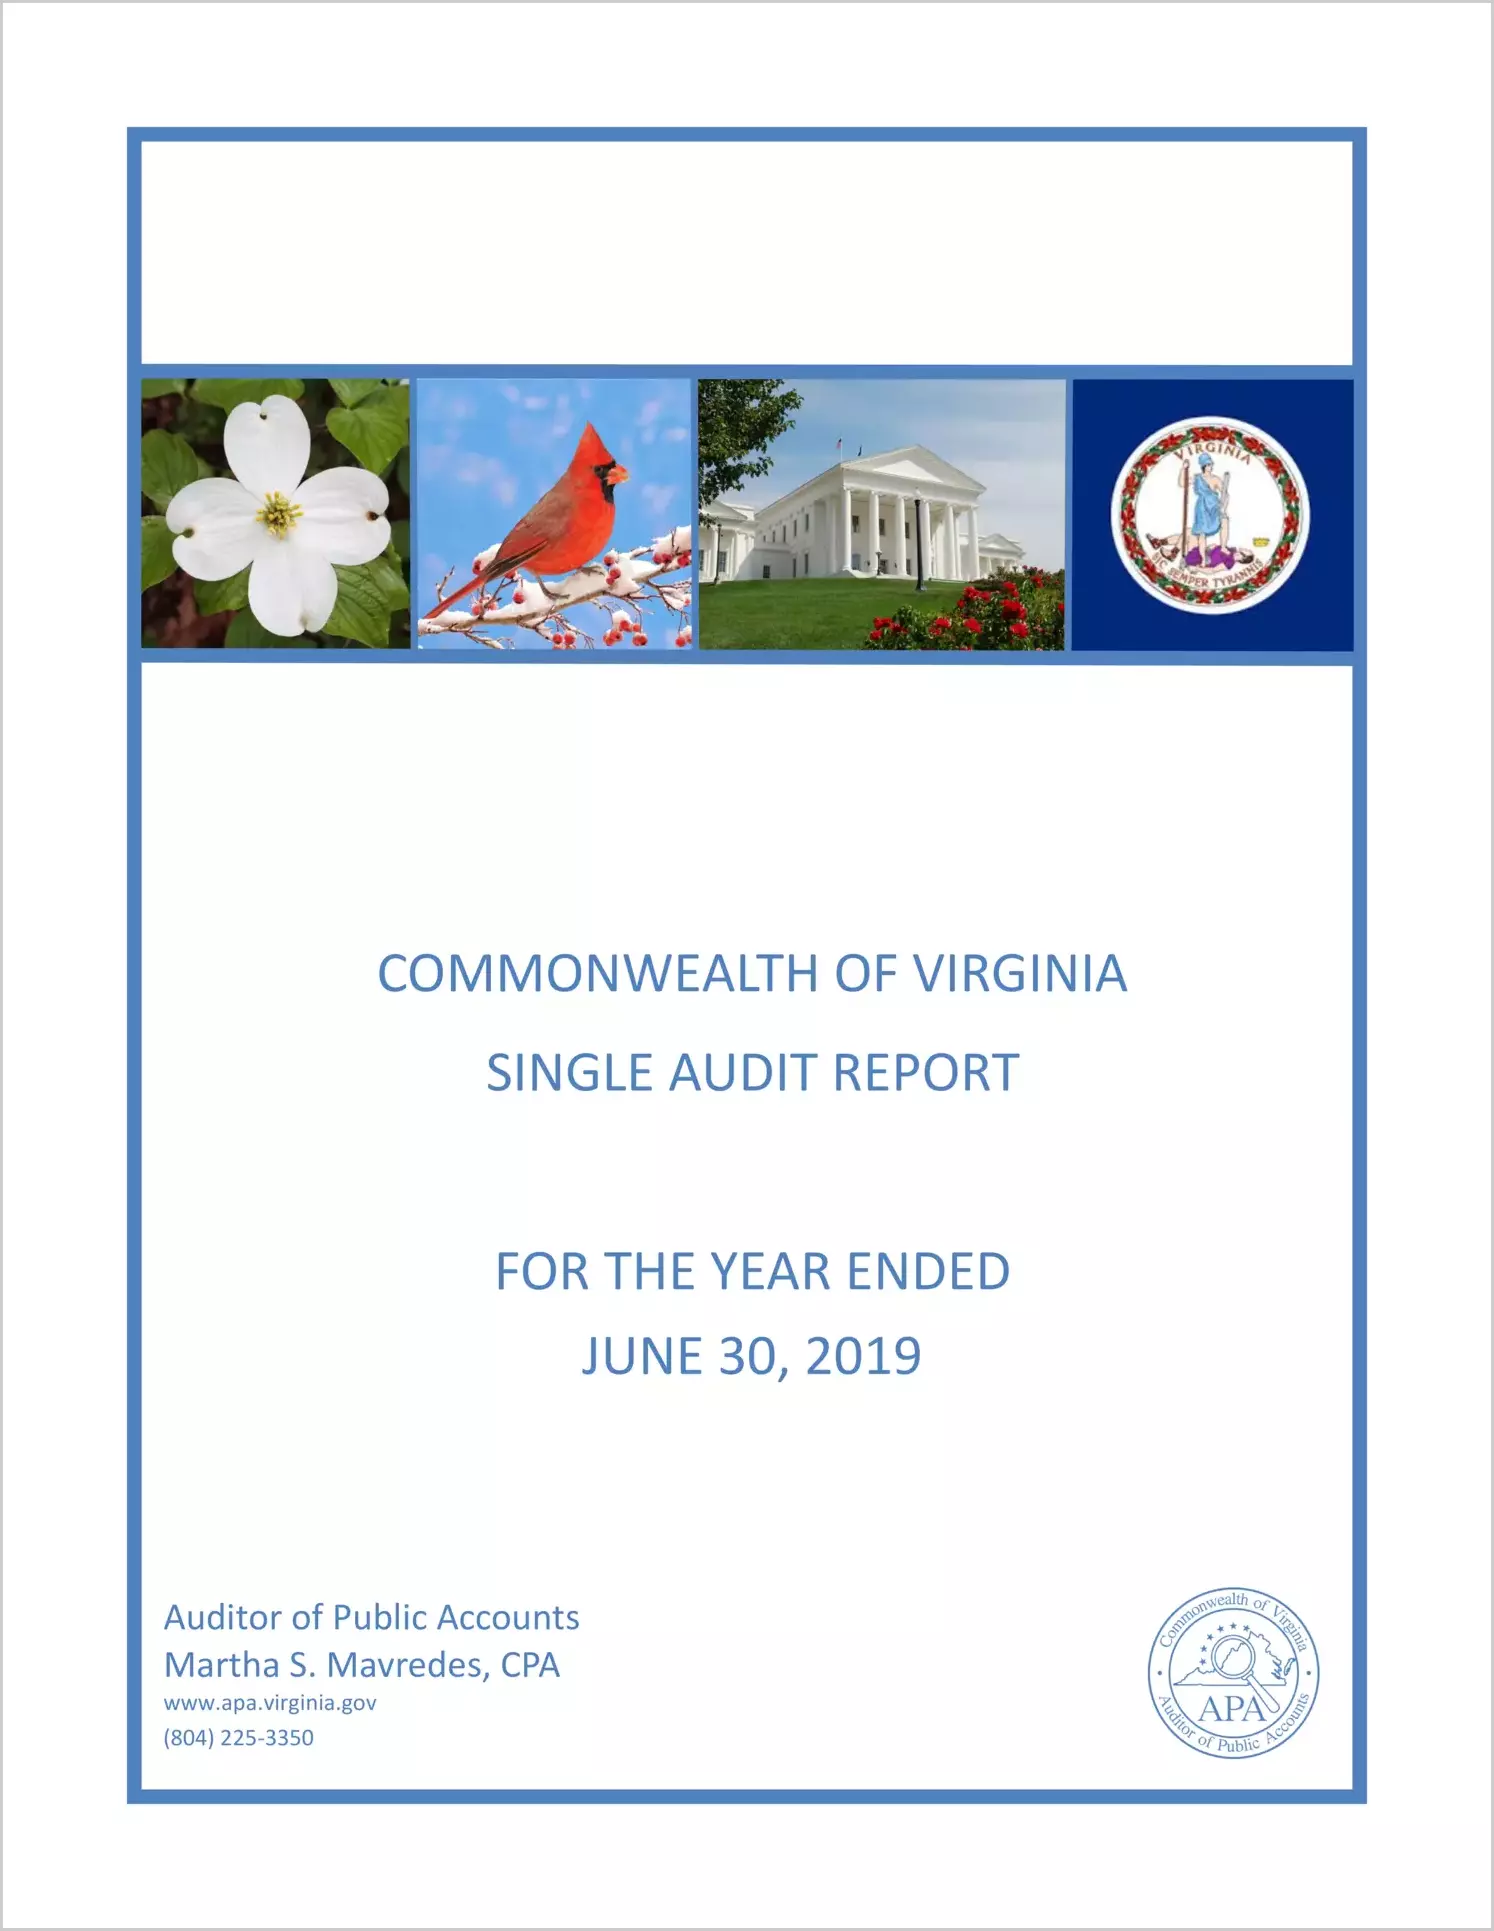 Commonwealth of Virginia Single Audit Report for the Year Ended June 30, 2019